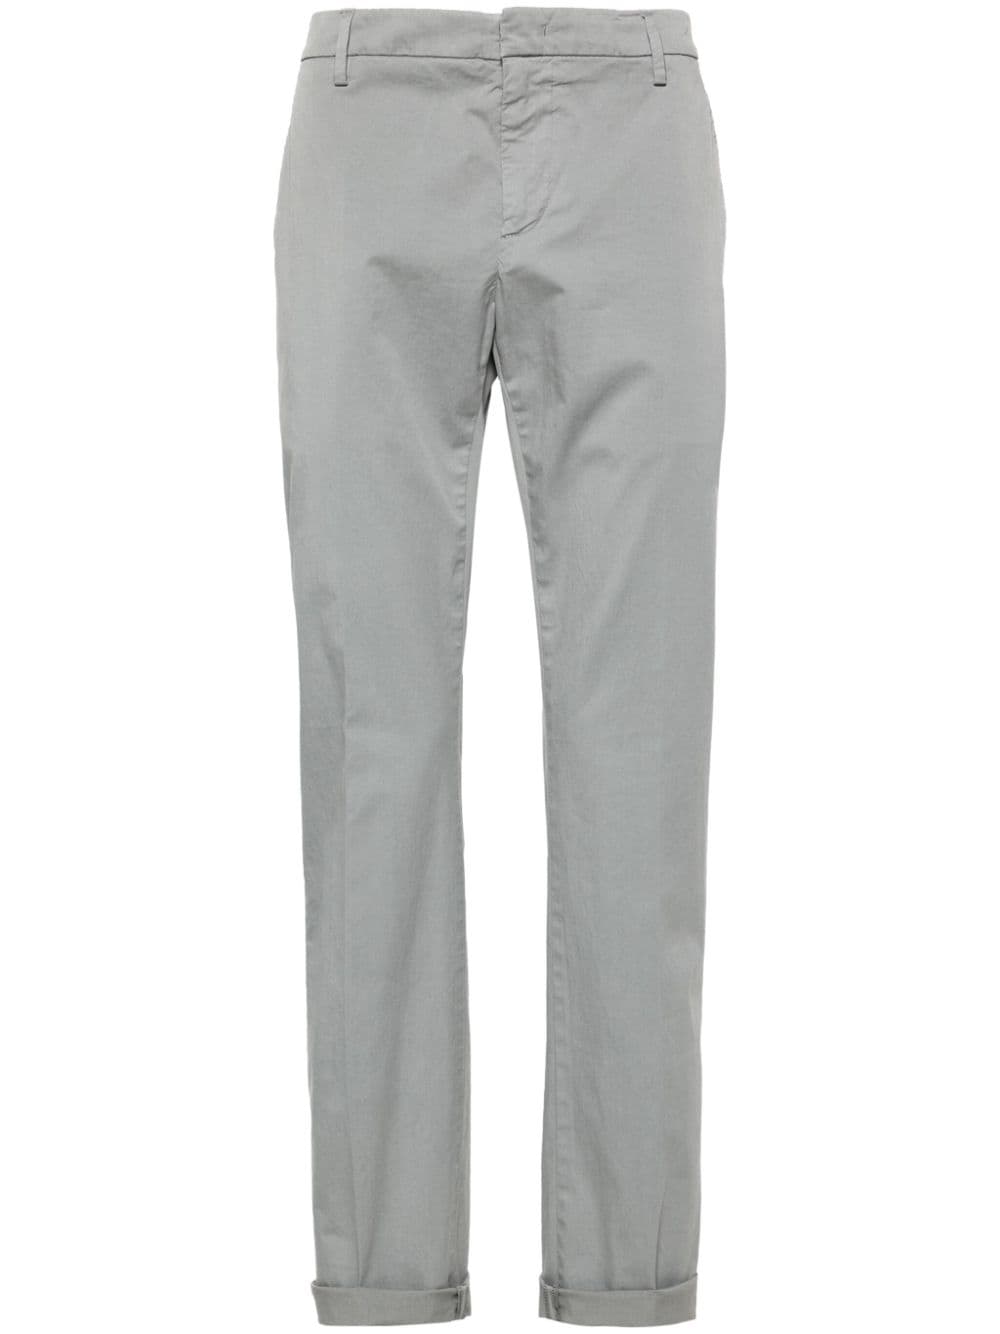 low-rise cotton chinos